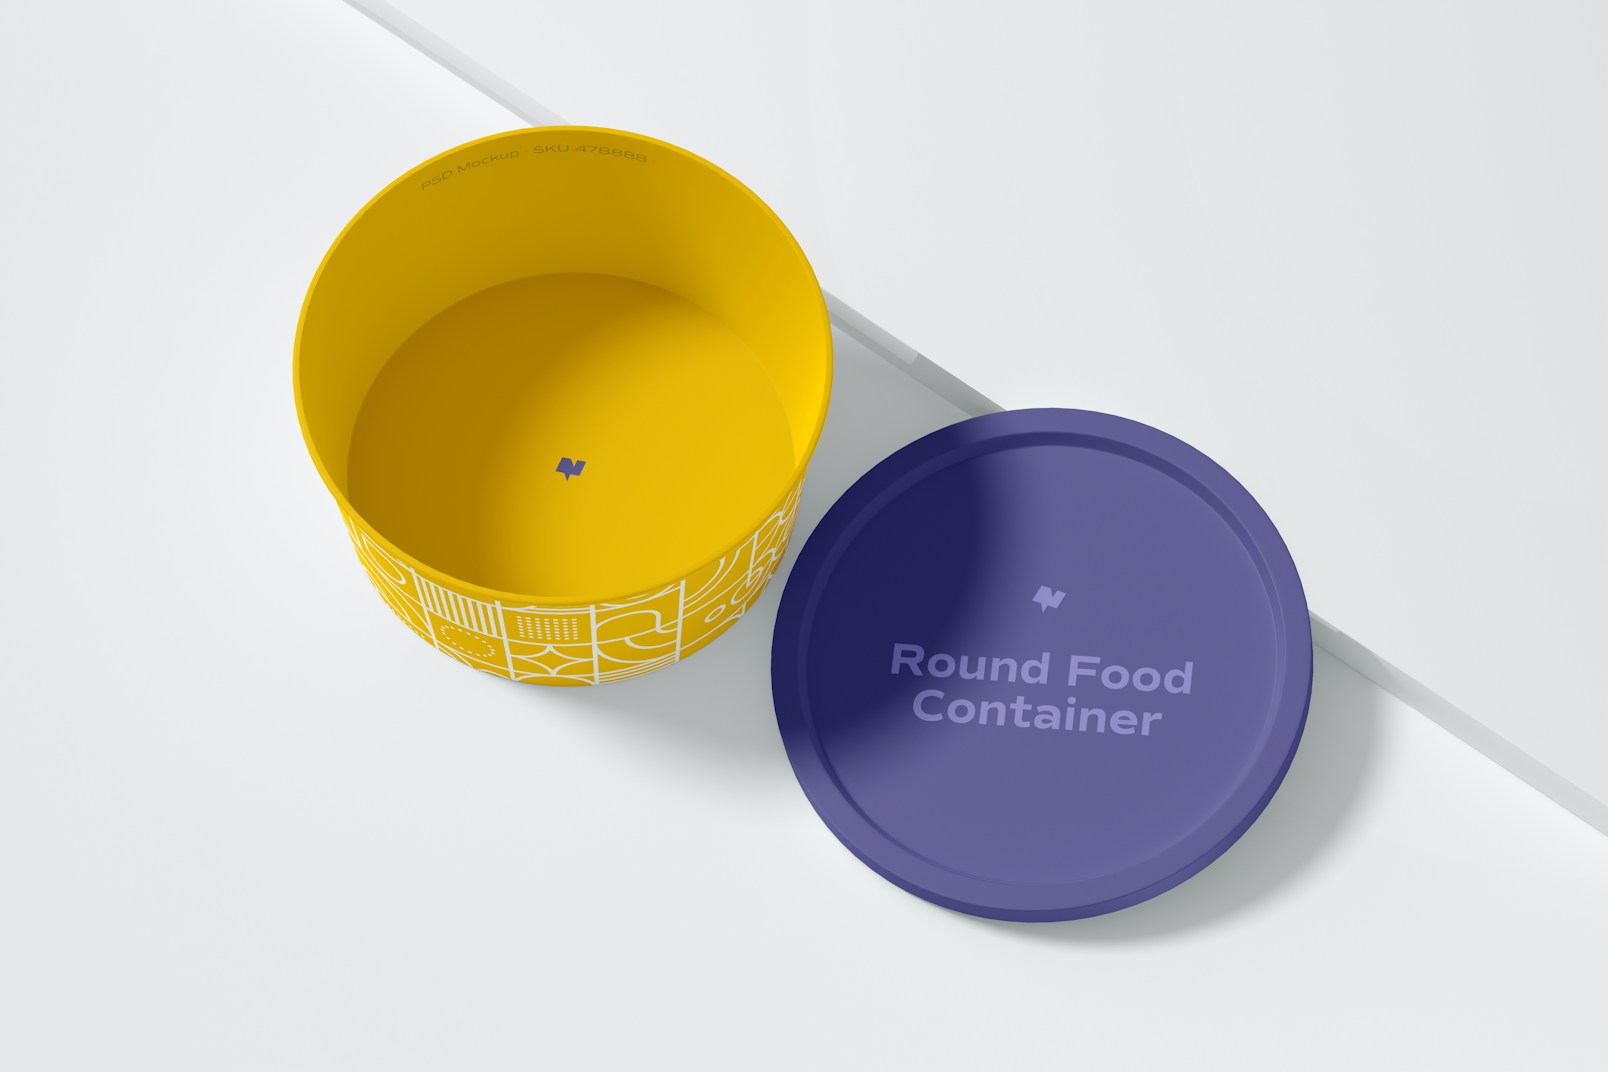 Round Plastic Food Delivery Container Mockup, Top View